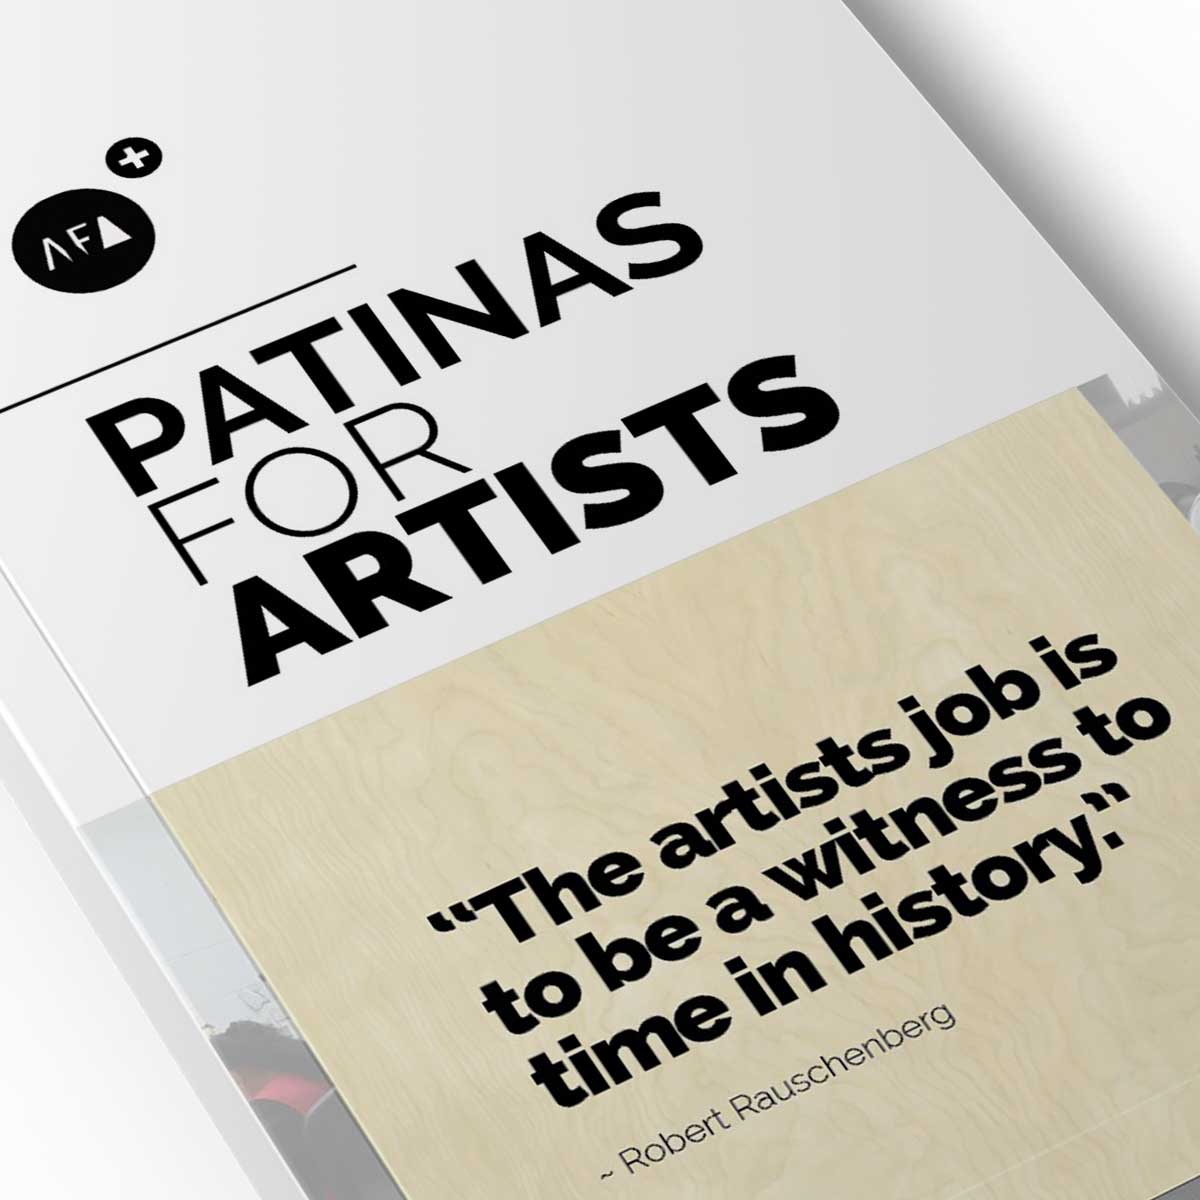 Patina's For Artists from American Fine Arts